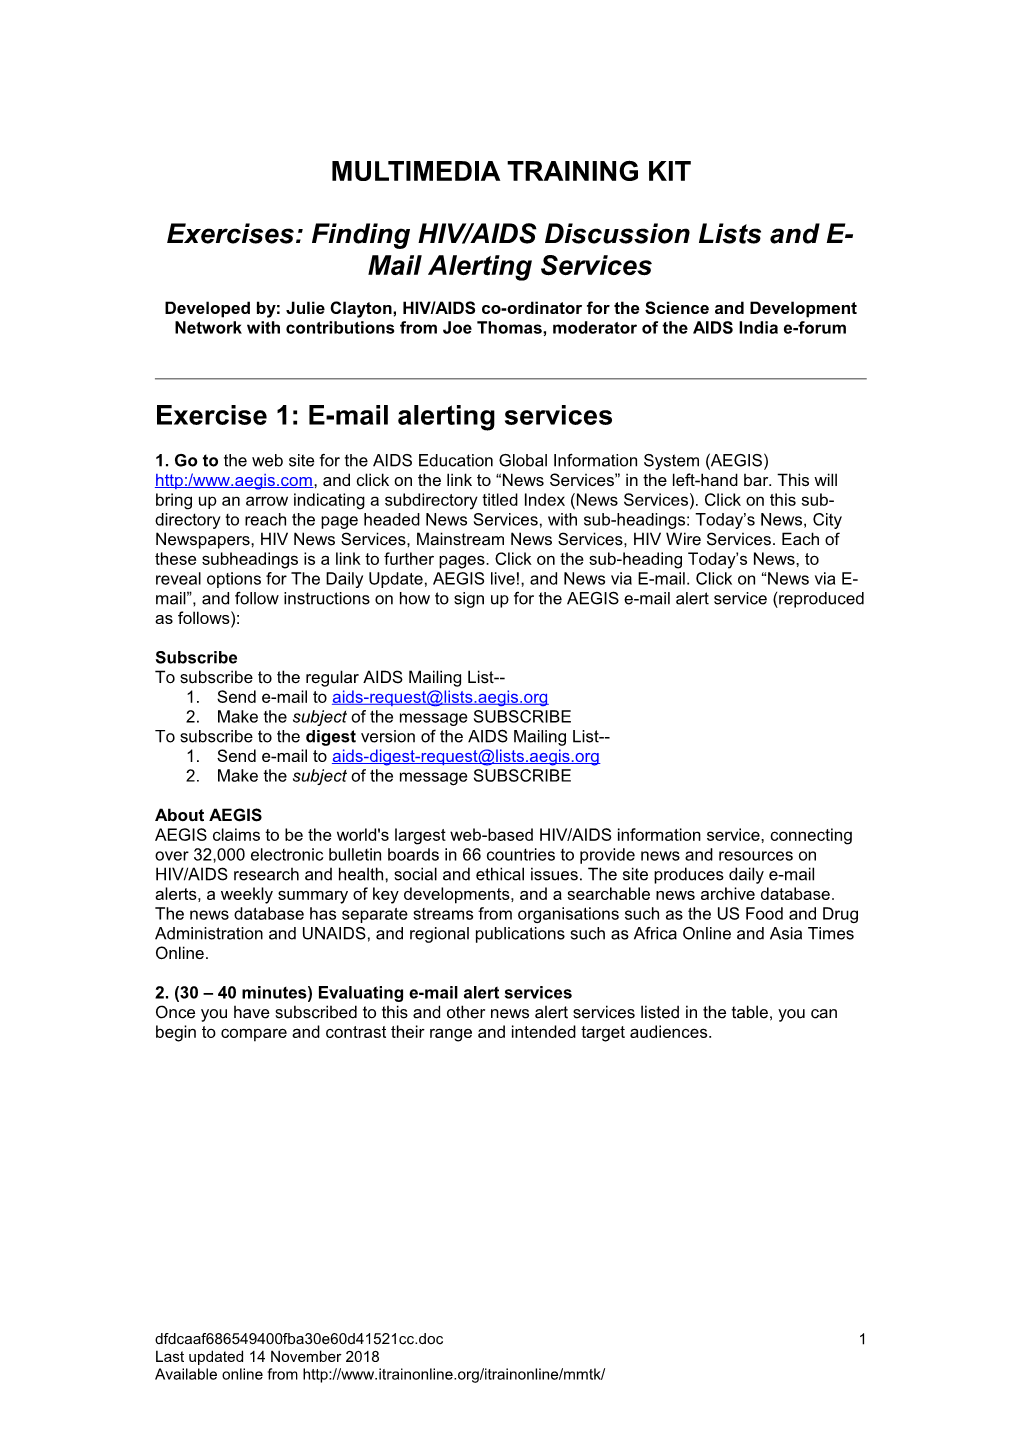 Exercises: Finding HIV/AIDS Discussion Lists and E-Mail Alerting Services